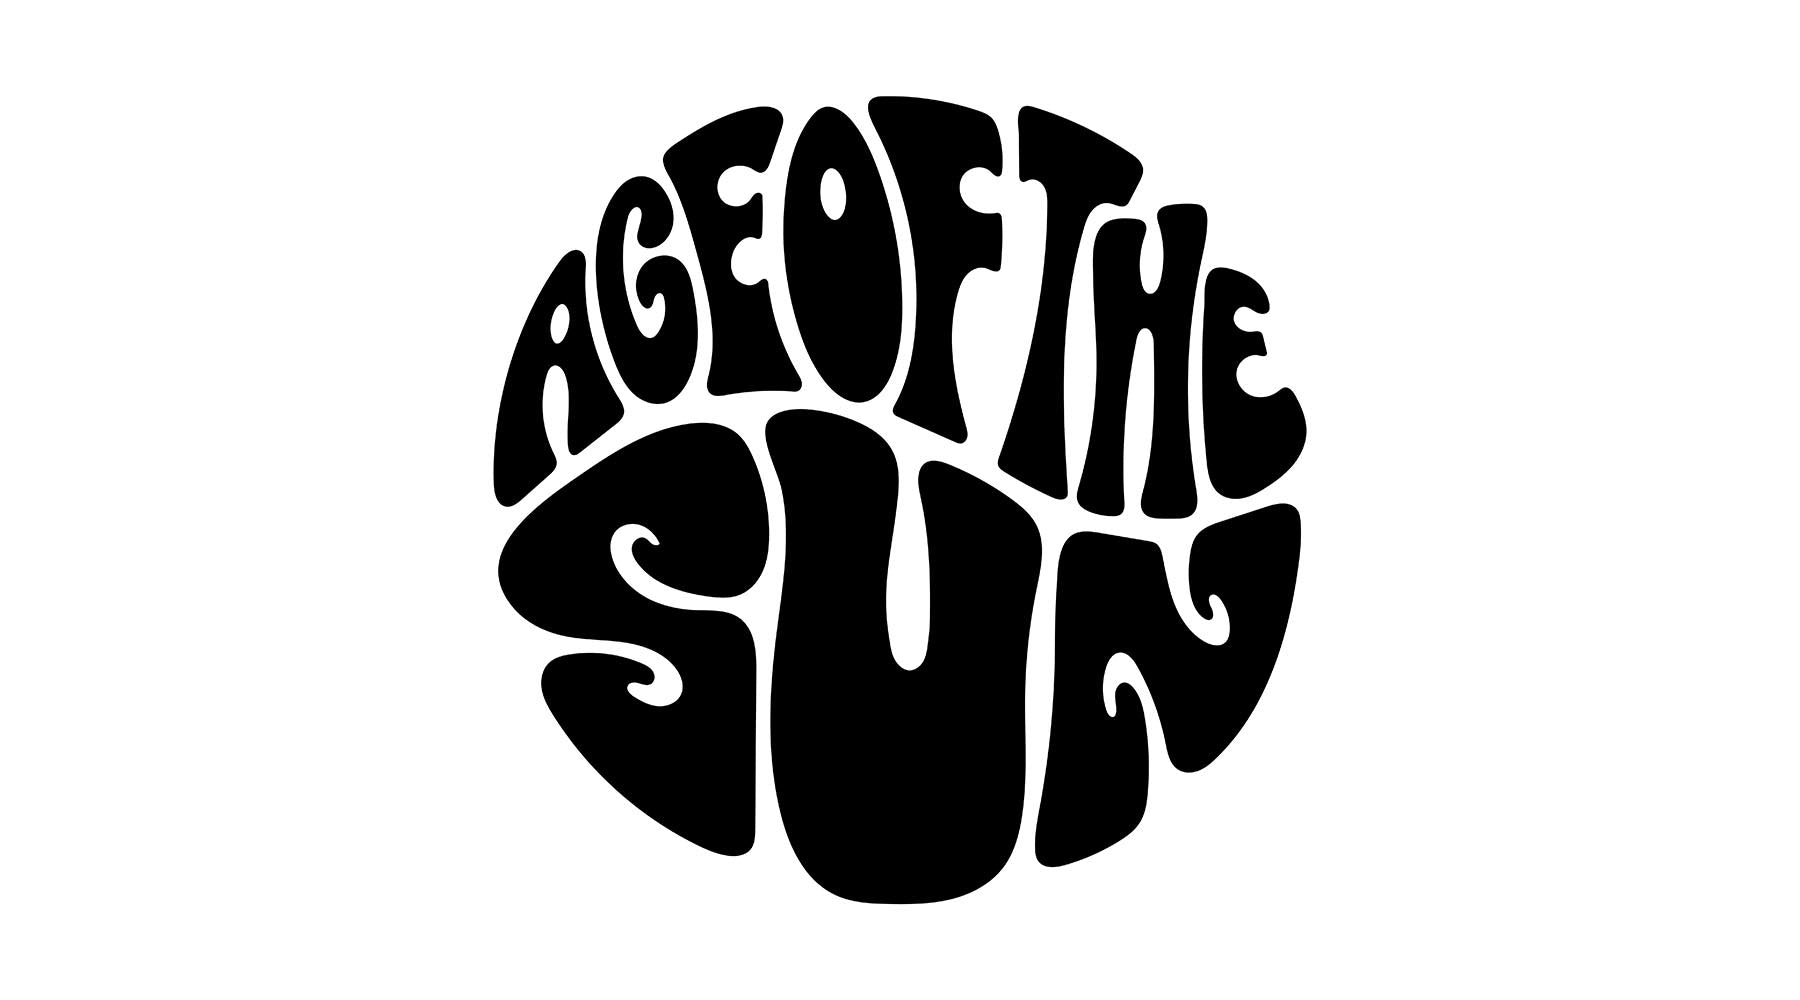 age of the sun vintage circle badge type design